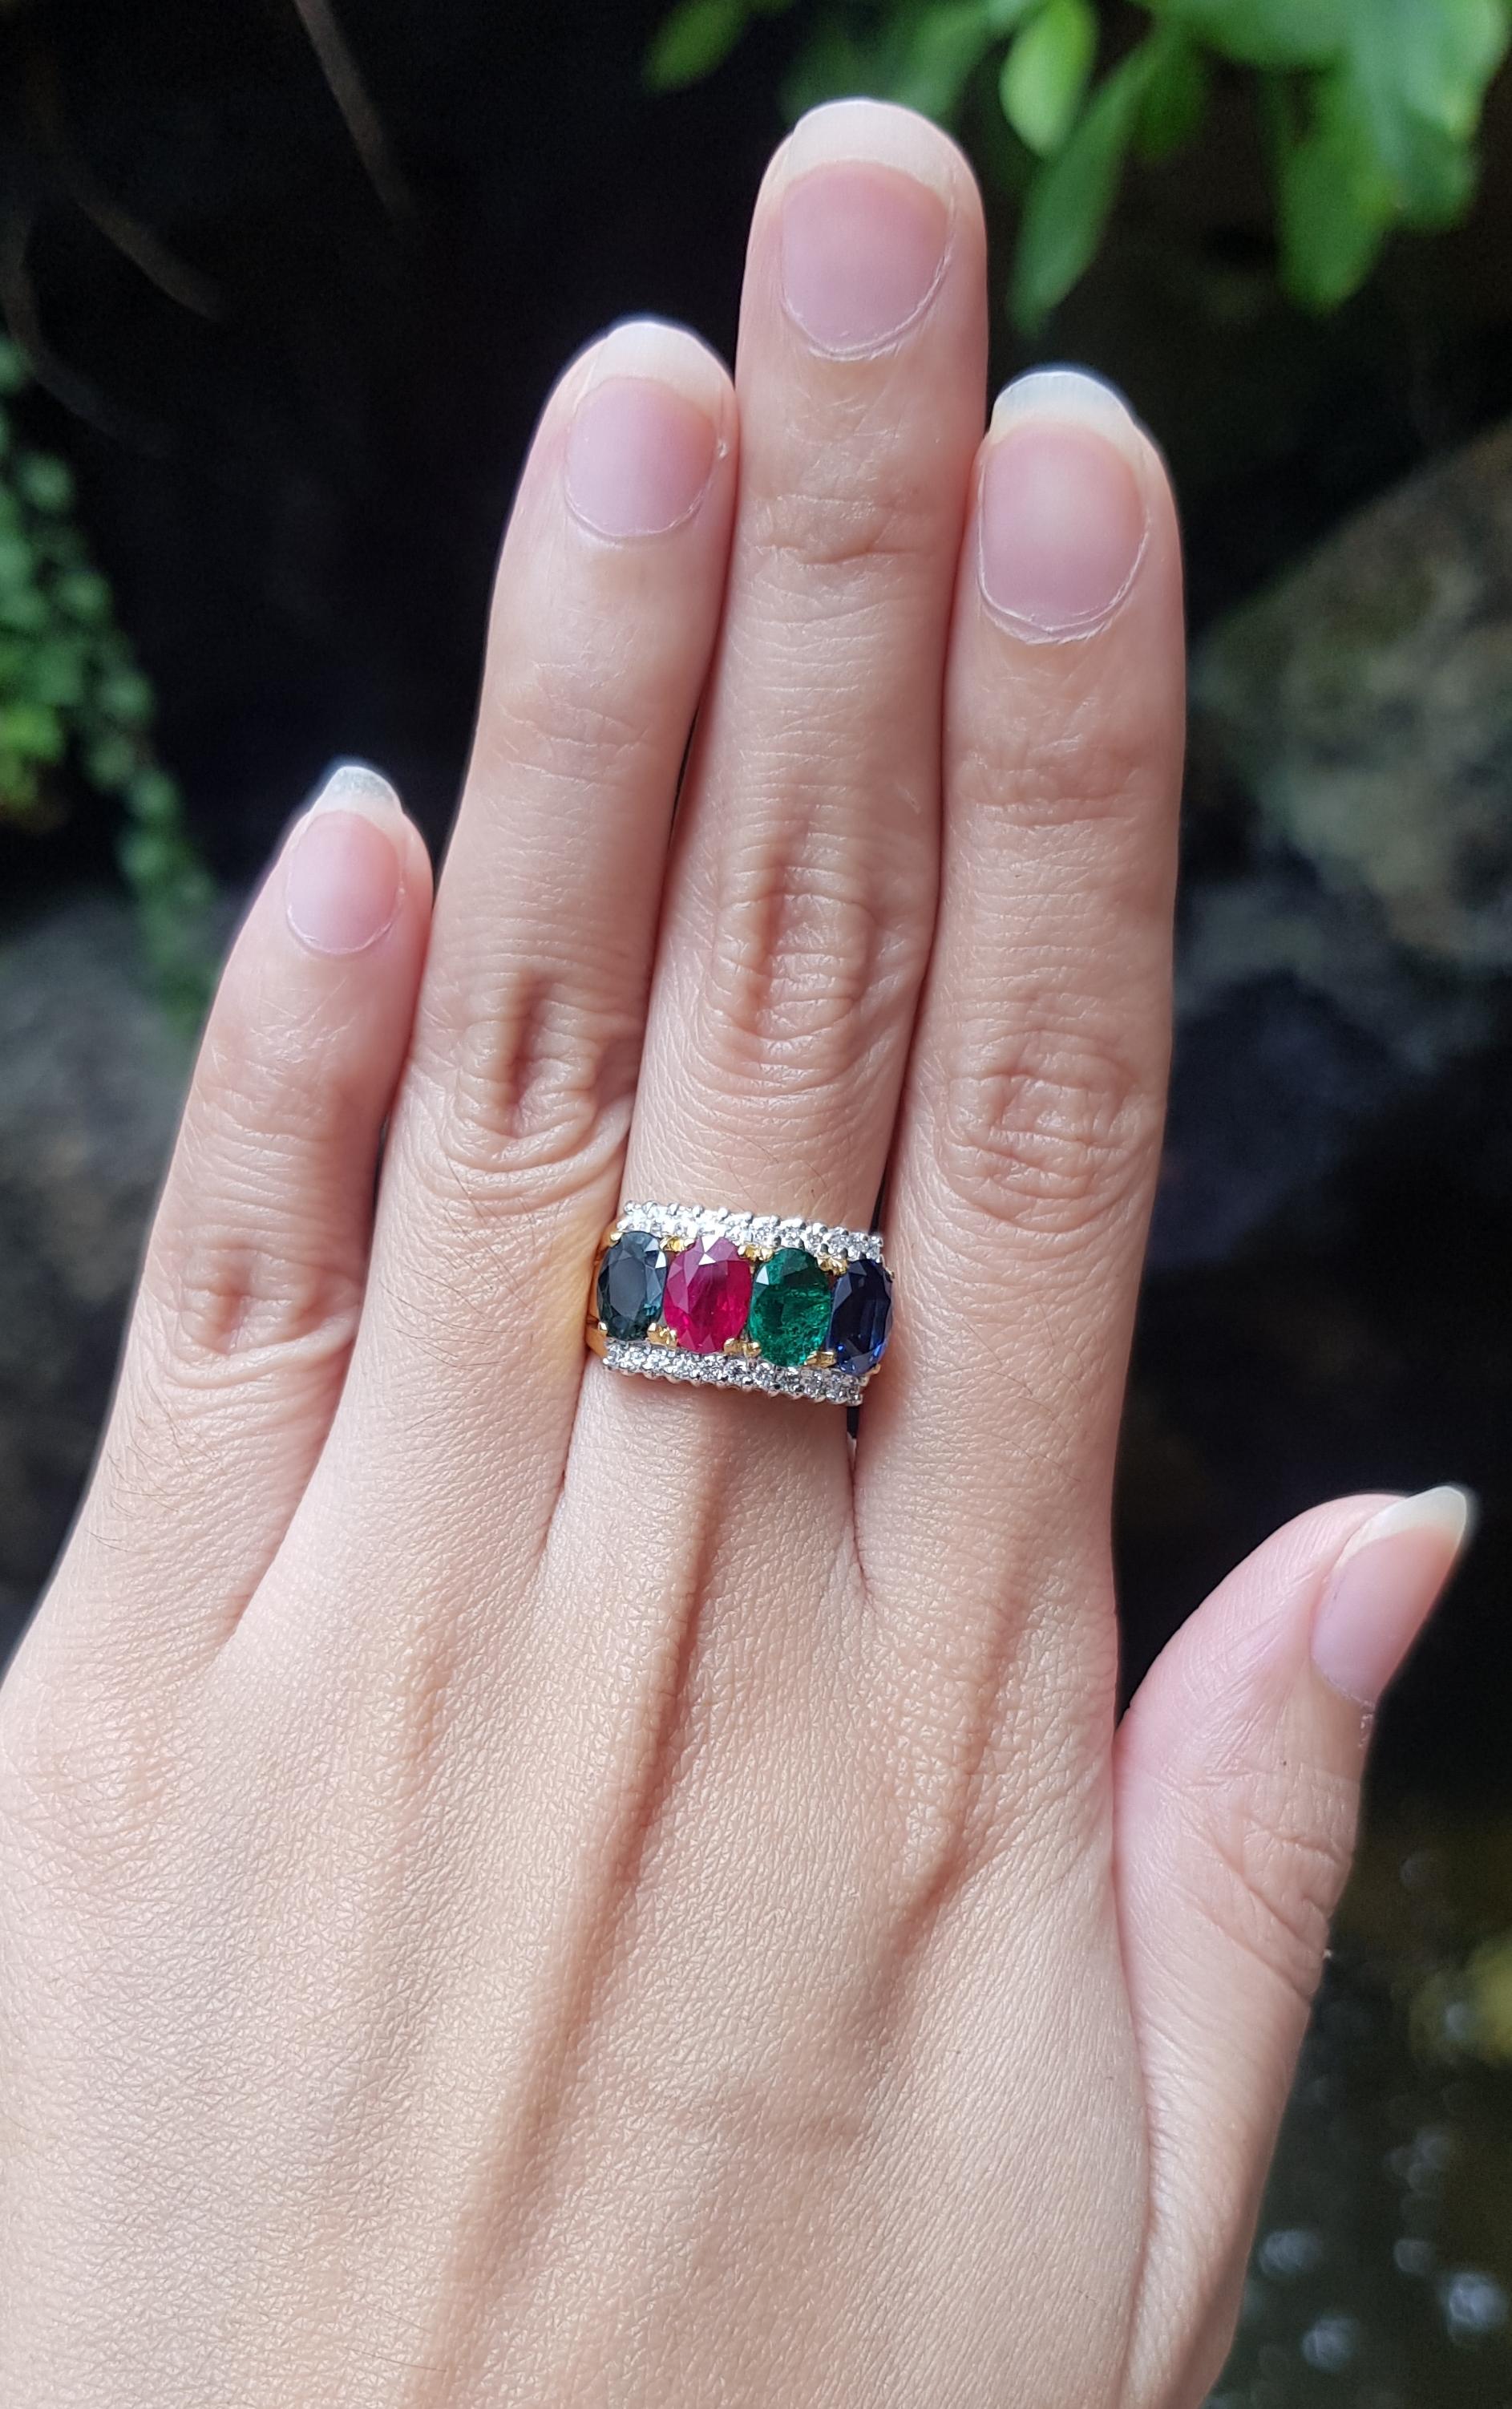 Emerald 0.60 carat, Green Sapphire 0.96 carat, Ruby 1.05 carats, Blue Sapphire 1.07 and Diamond 0.29 carat Ring set in 18 Karat Gold Settings

Width:  1.7 cm 
Length: 1.0 cm
Ring Size: 53
Total Weight: 5.98 grams

